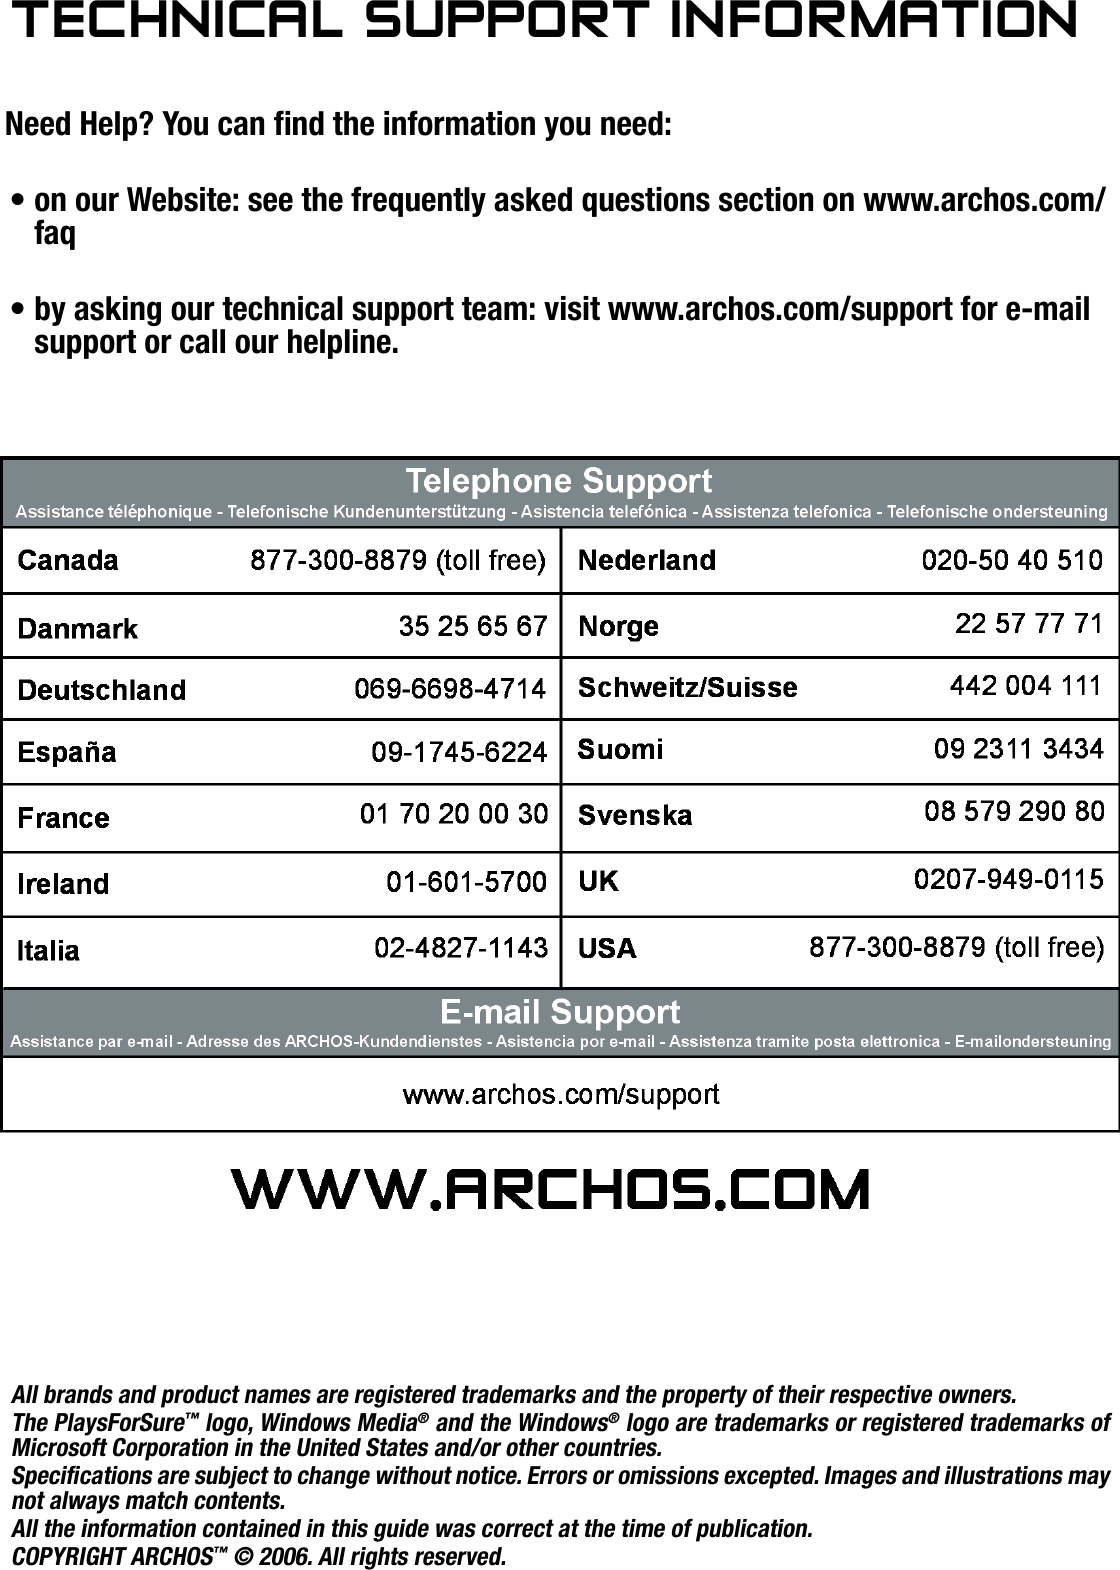 504/604MANUAL V2.0TECHNICAL SUPPORT INFORMATION   &gt;   p. 59TeChnICal suPPOrT InfOrMaTIOnNeed Help? You can nd the information you need:on our Website: see the frequently asked questions section on www.archos.com/faqby asking our technical support team: visit www.archos.com/support for e-mail support or call our helpline.••All brands and product names are registered trademarks and the property of their respective owners.The PlaysForSure™ logo, Windows Media® and the Windows® logo are trademarks or registered trademarks of Microsoft Corporation in the United States and/or other countries.Specications are subject to change without notice. Errors or omissions excepted. Images and illustrations may not always match contents.All the information contained in this guide was correct at the time of publication.COPYRIGHT ARCHOS™ © 2006. All rights reserved.